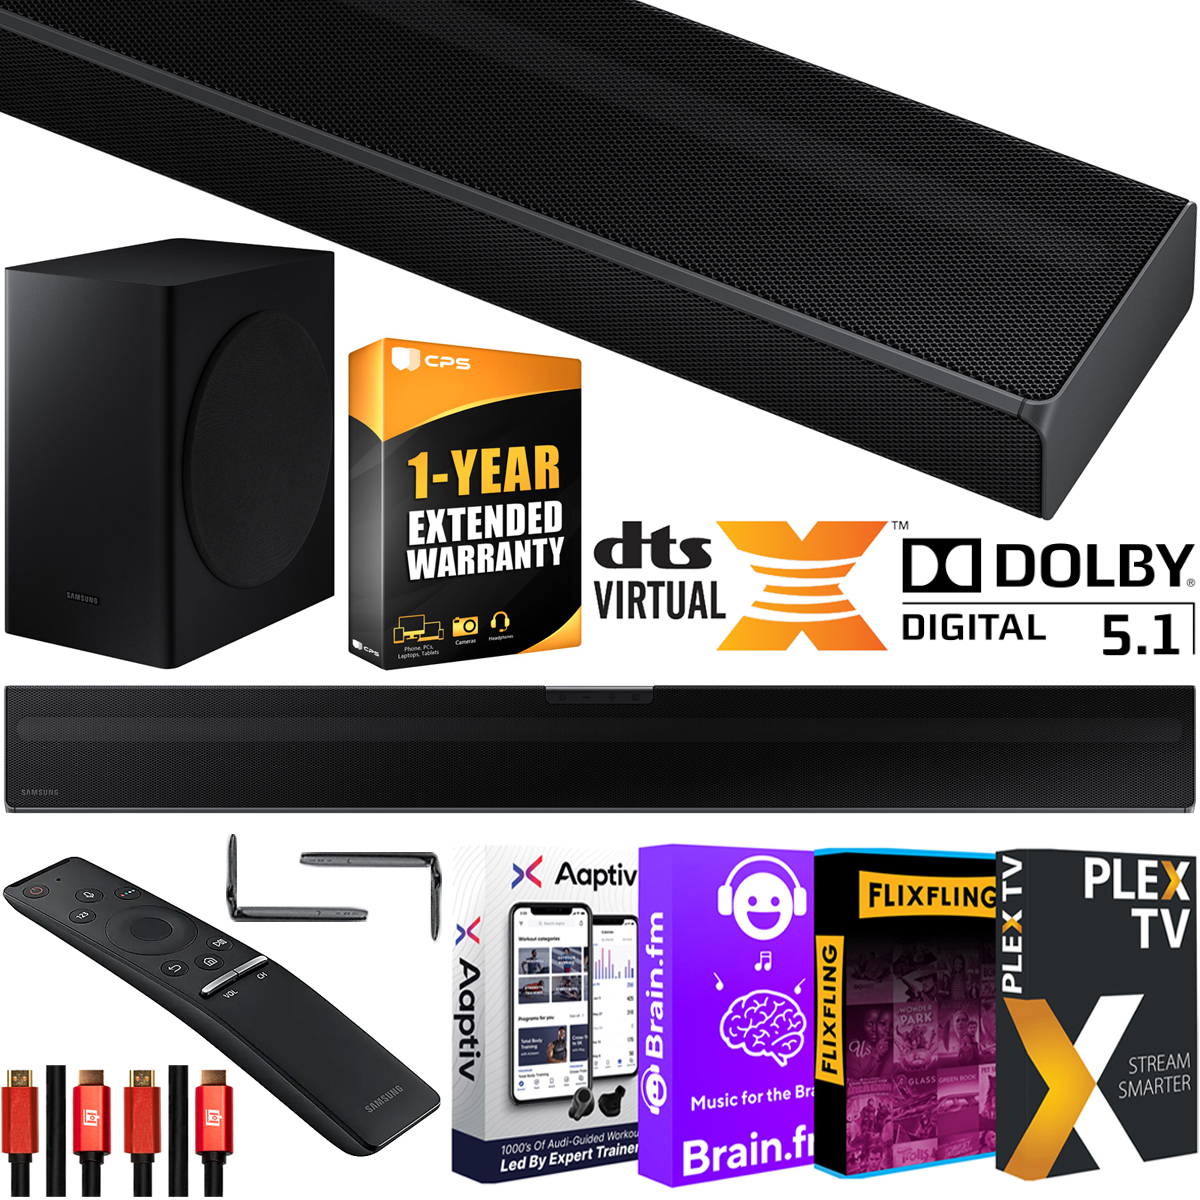 Samsung HW-Q60T 5.1ch Acoustic Beam Soundbar with Dolby Digital 5.1 / DTS Virtual:X Theater 3D Surround Sound Q Series Bundle With 2x Deco Gear HDMI Cables + Streaming Kit + Extended Coverage - image 1 of 9